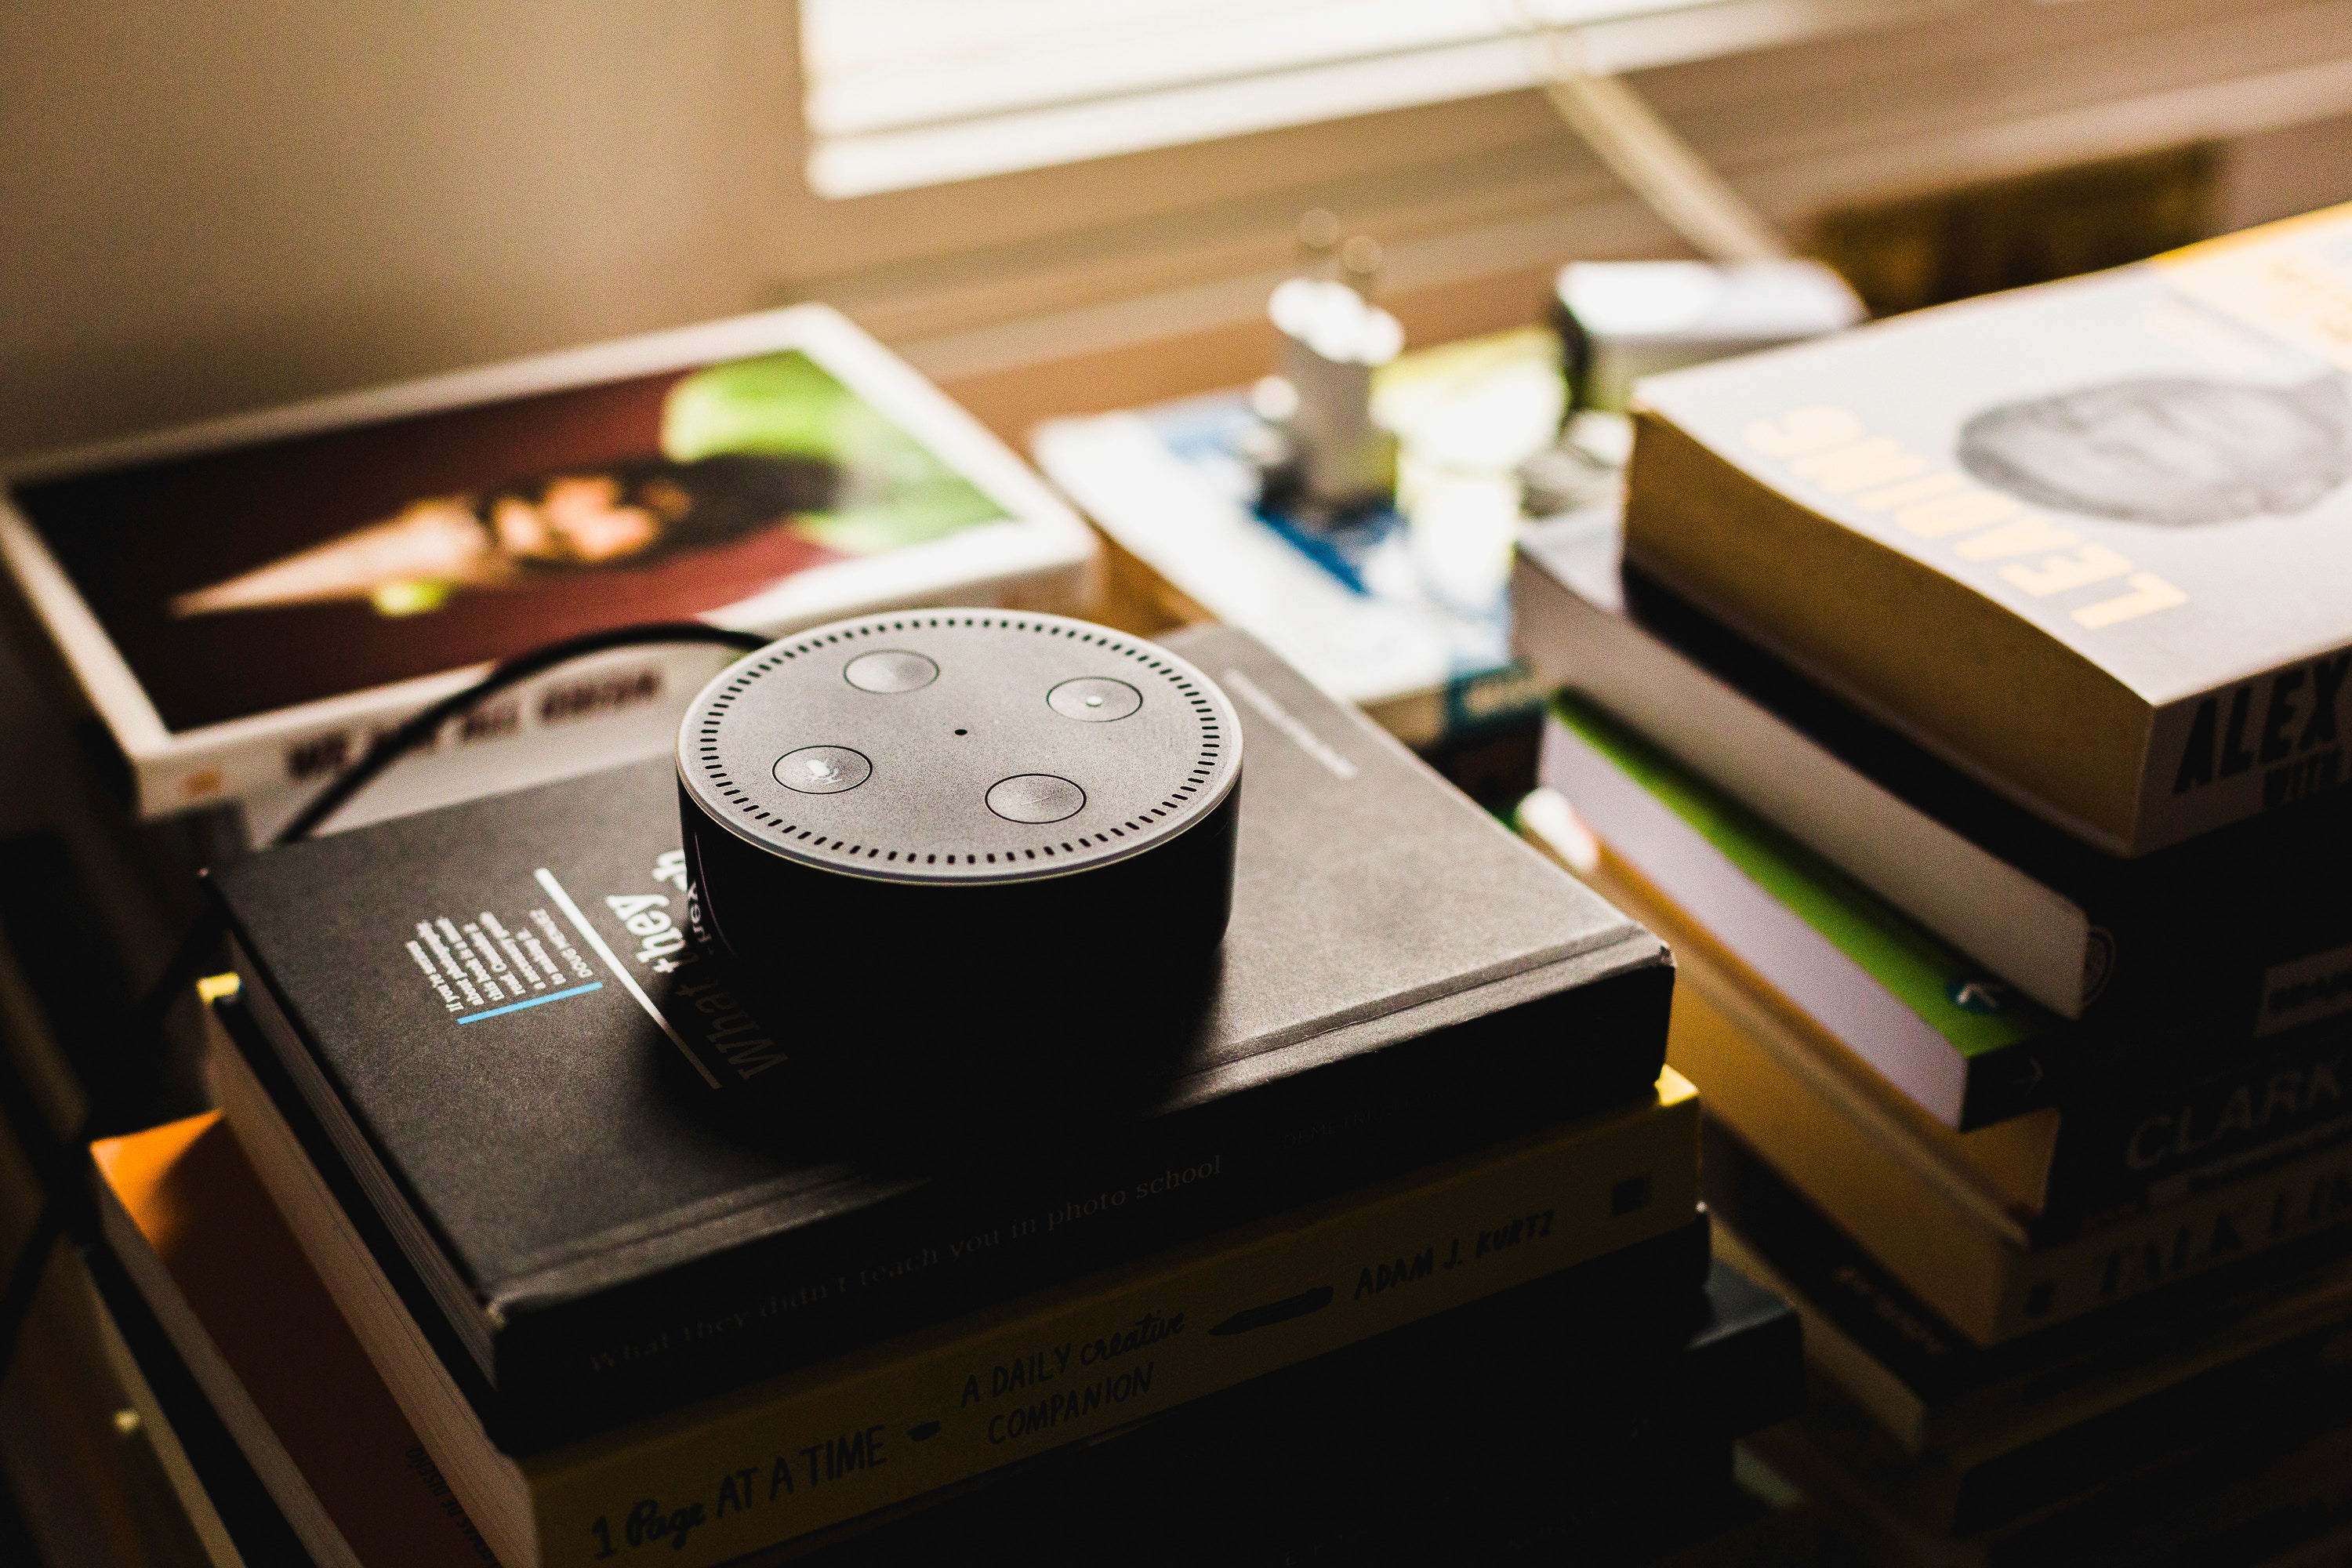 copywriting and voice-friendly search devices such as alexa and siri